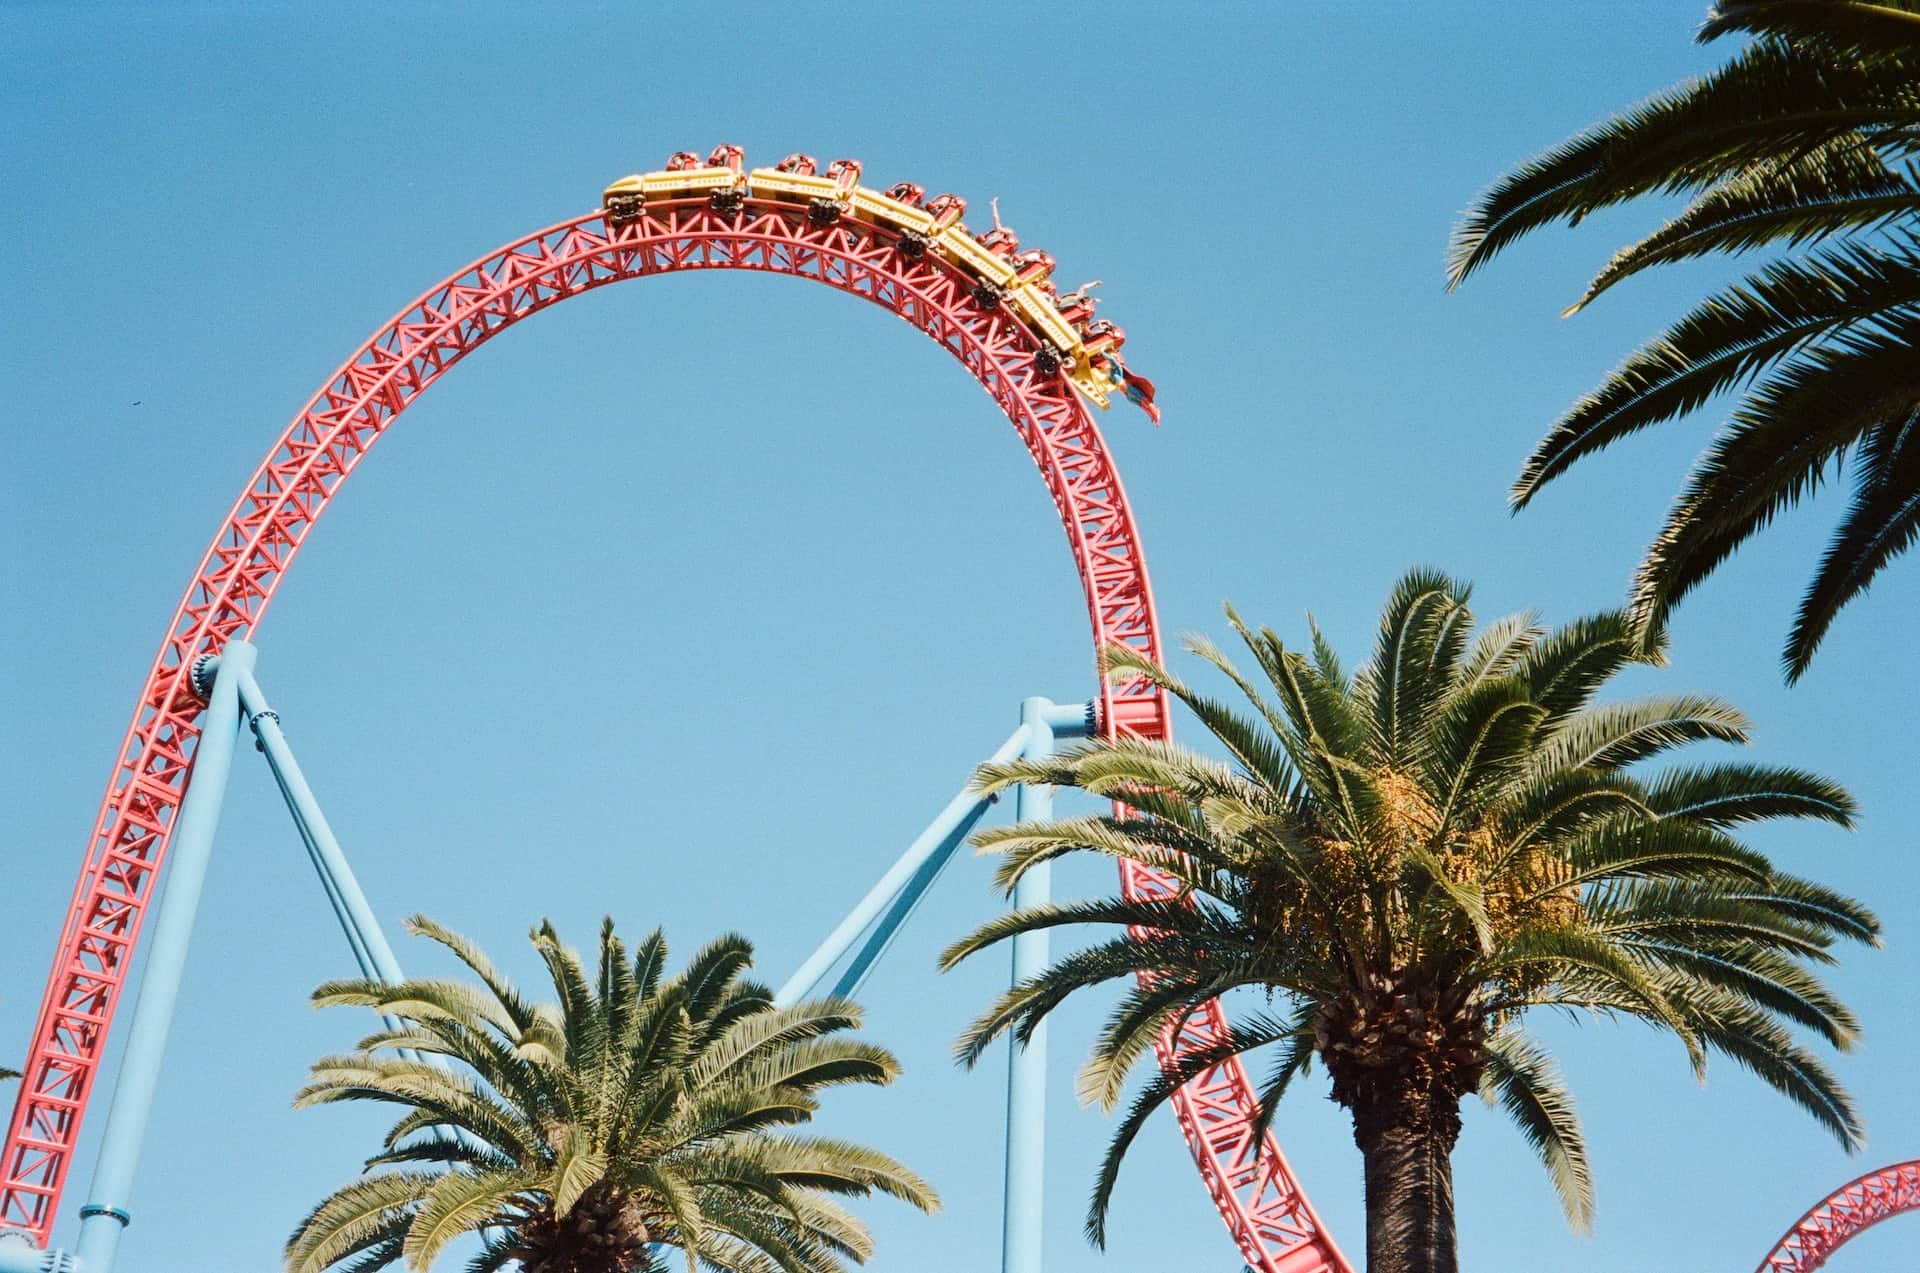 A roller coaster ride with palm trees in the background.